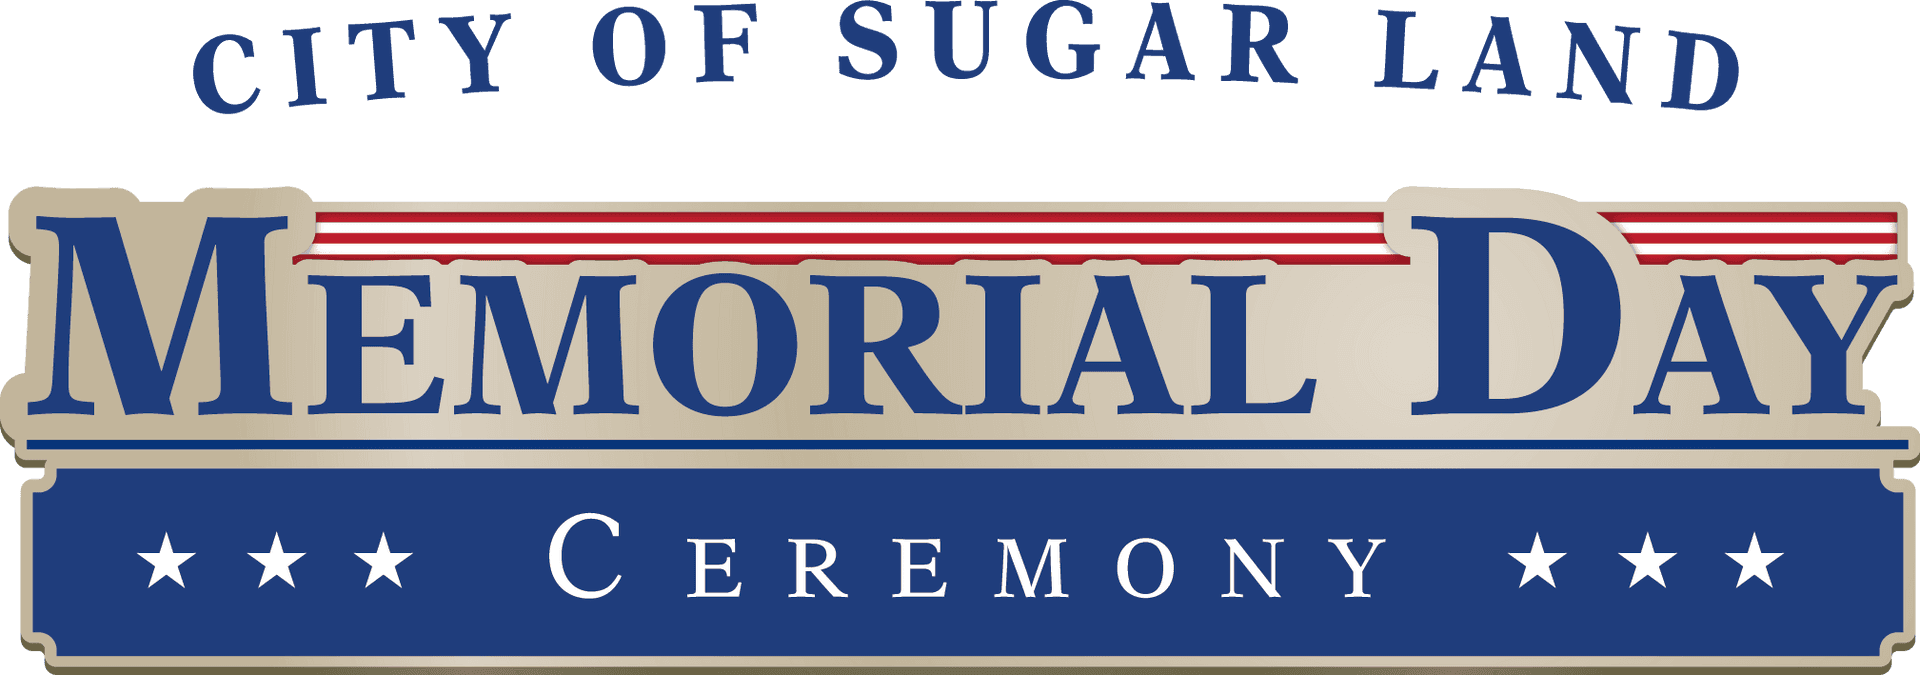 Sugar Land Memorial Day Ceremony Banner PNG